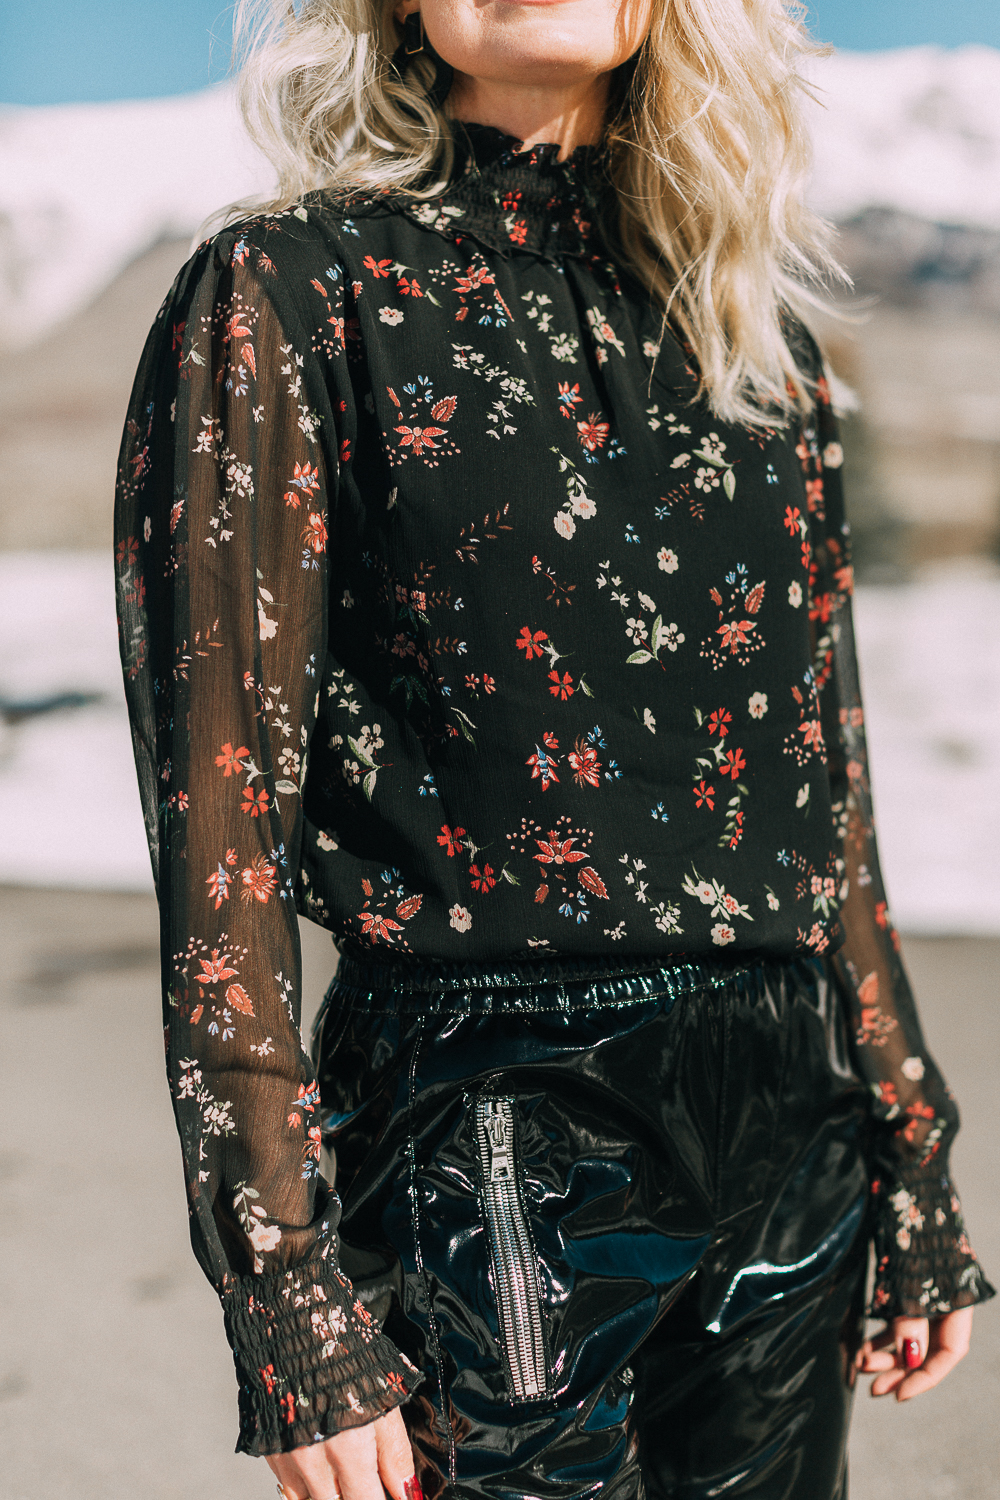 Fashion Blogger Erin Busbee of Busbee Style wearing a black floral blouse by Sanctuary tucked in to vinyl pants by RtA